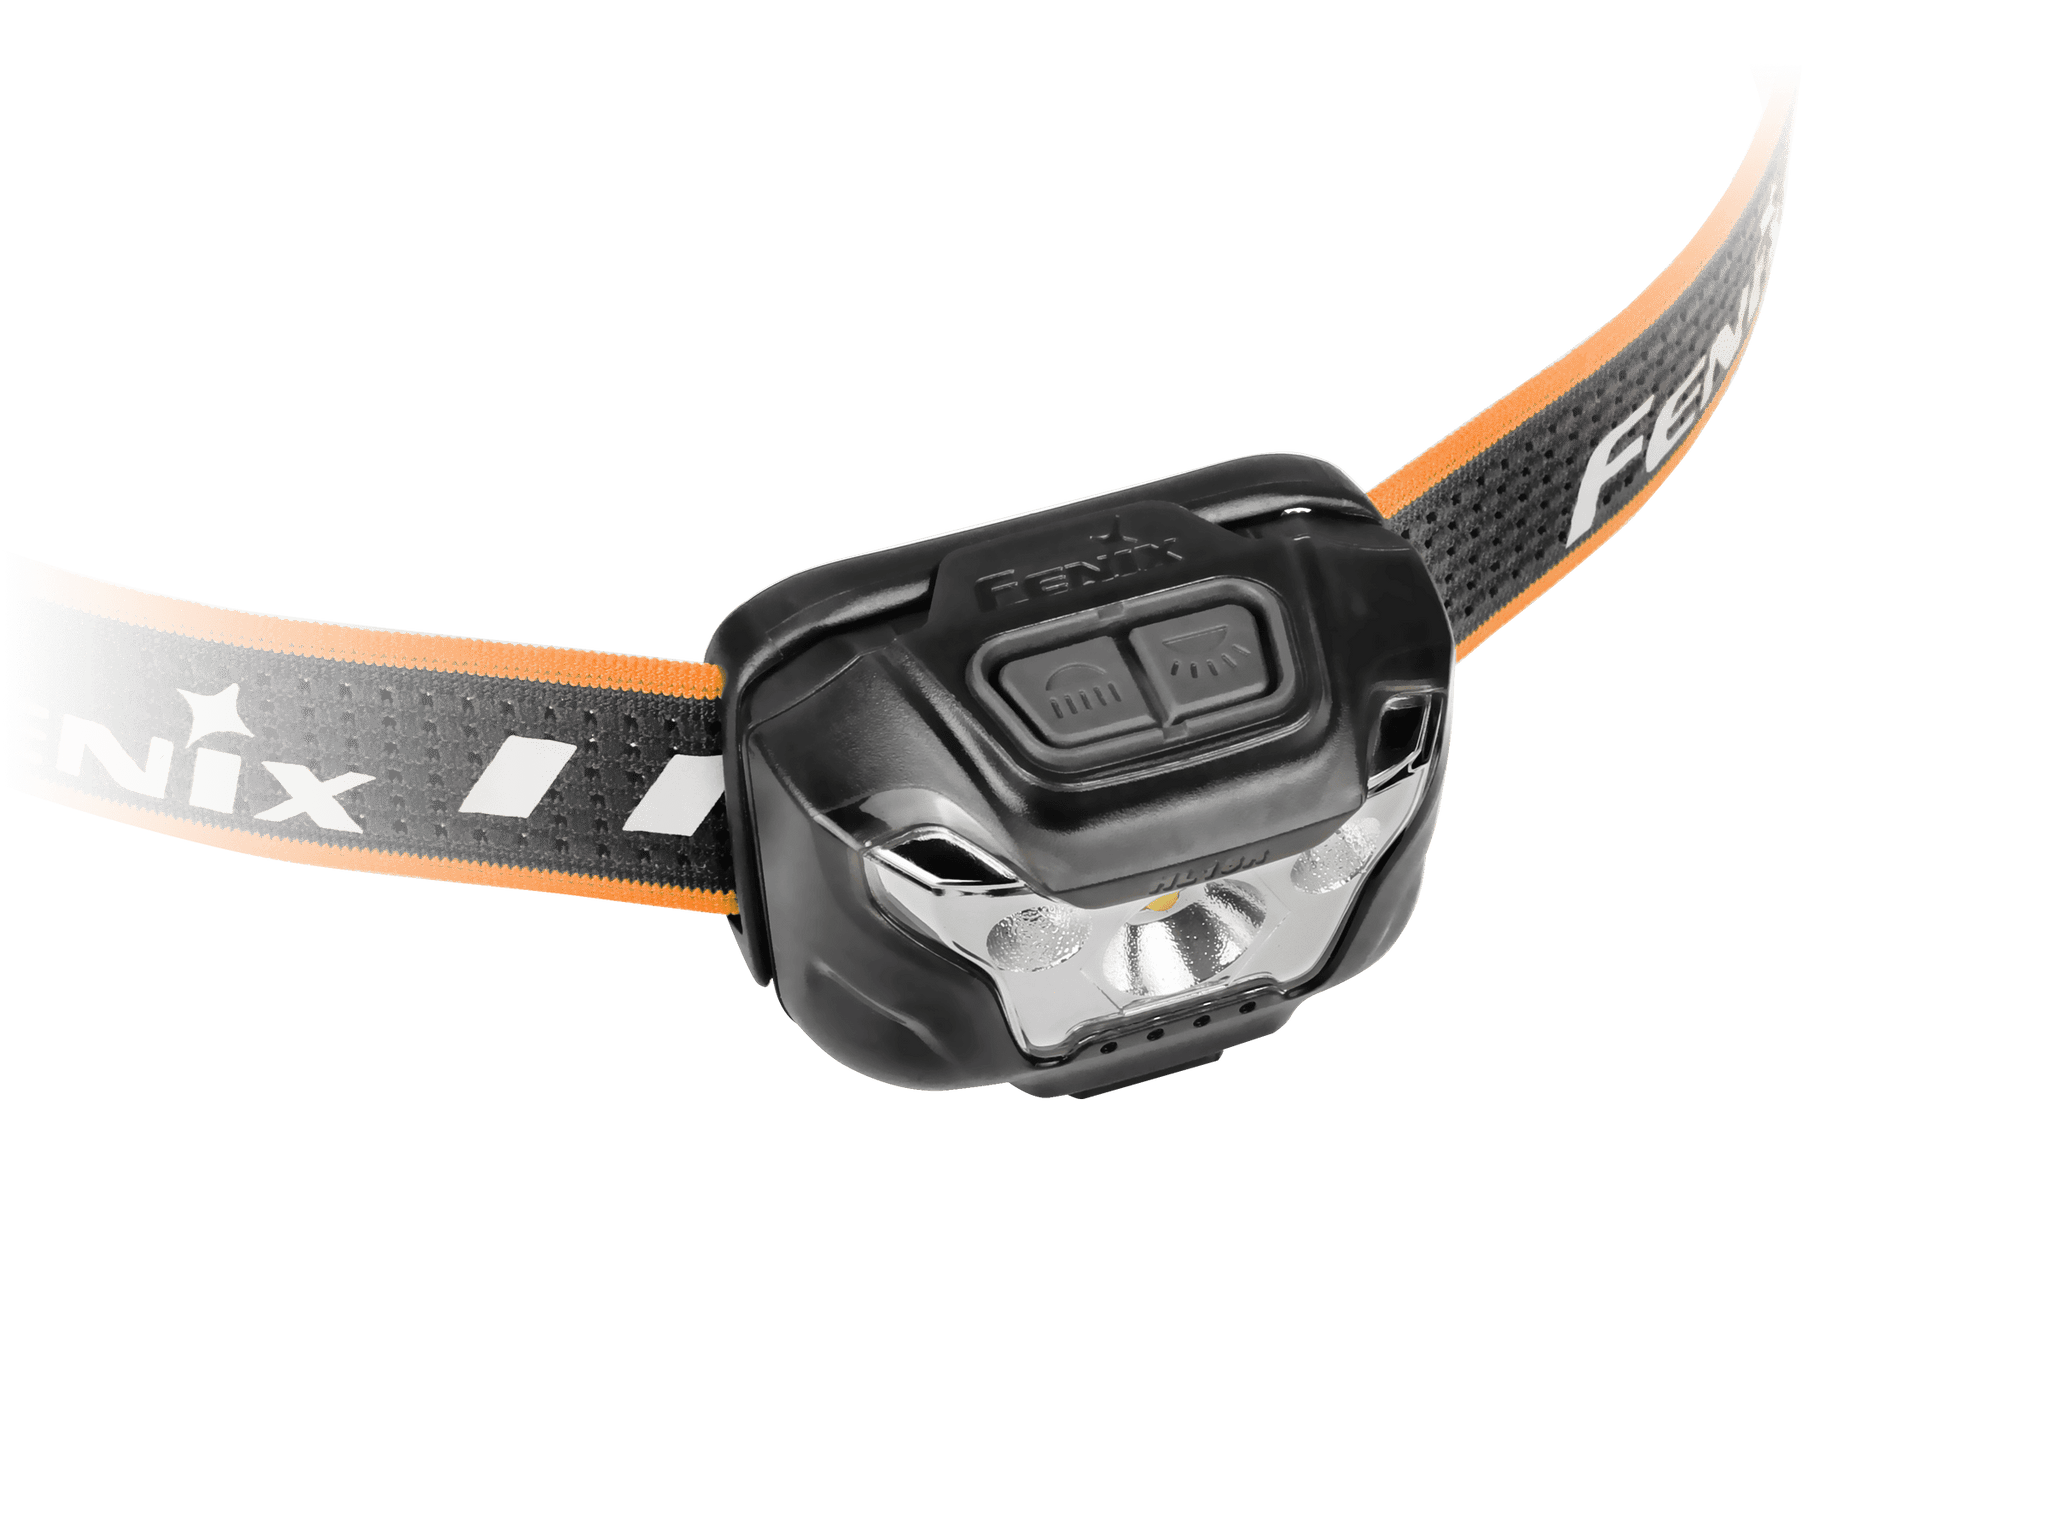 Fenix HL18R Rechargeable LED Headlamp in India, Powerful Compact and Easy to carry Head Torch for hands free lighting, Headlamp for outdoors, camping, running, work, mining, trekks  